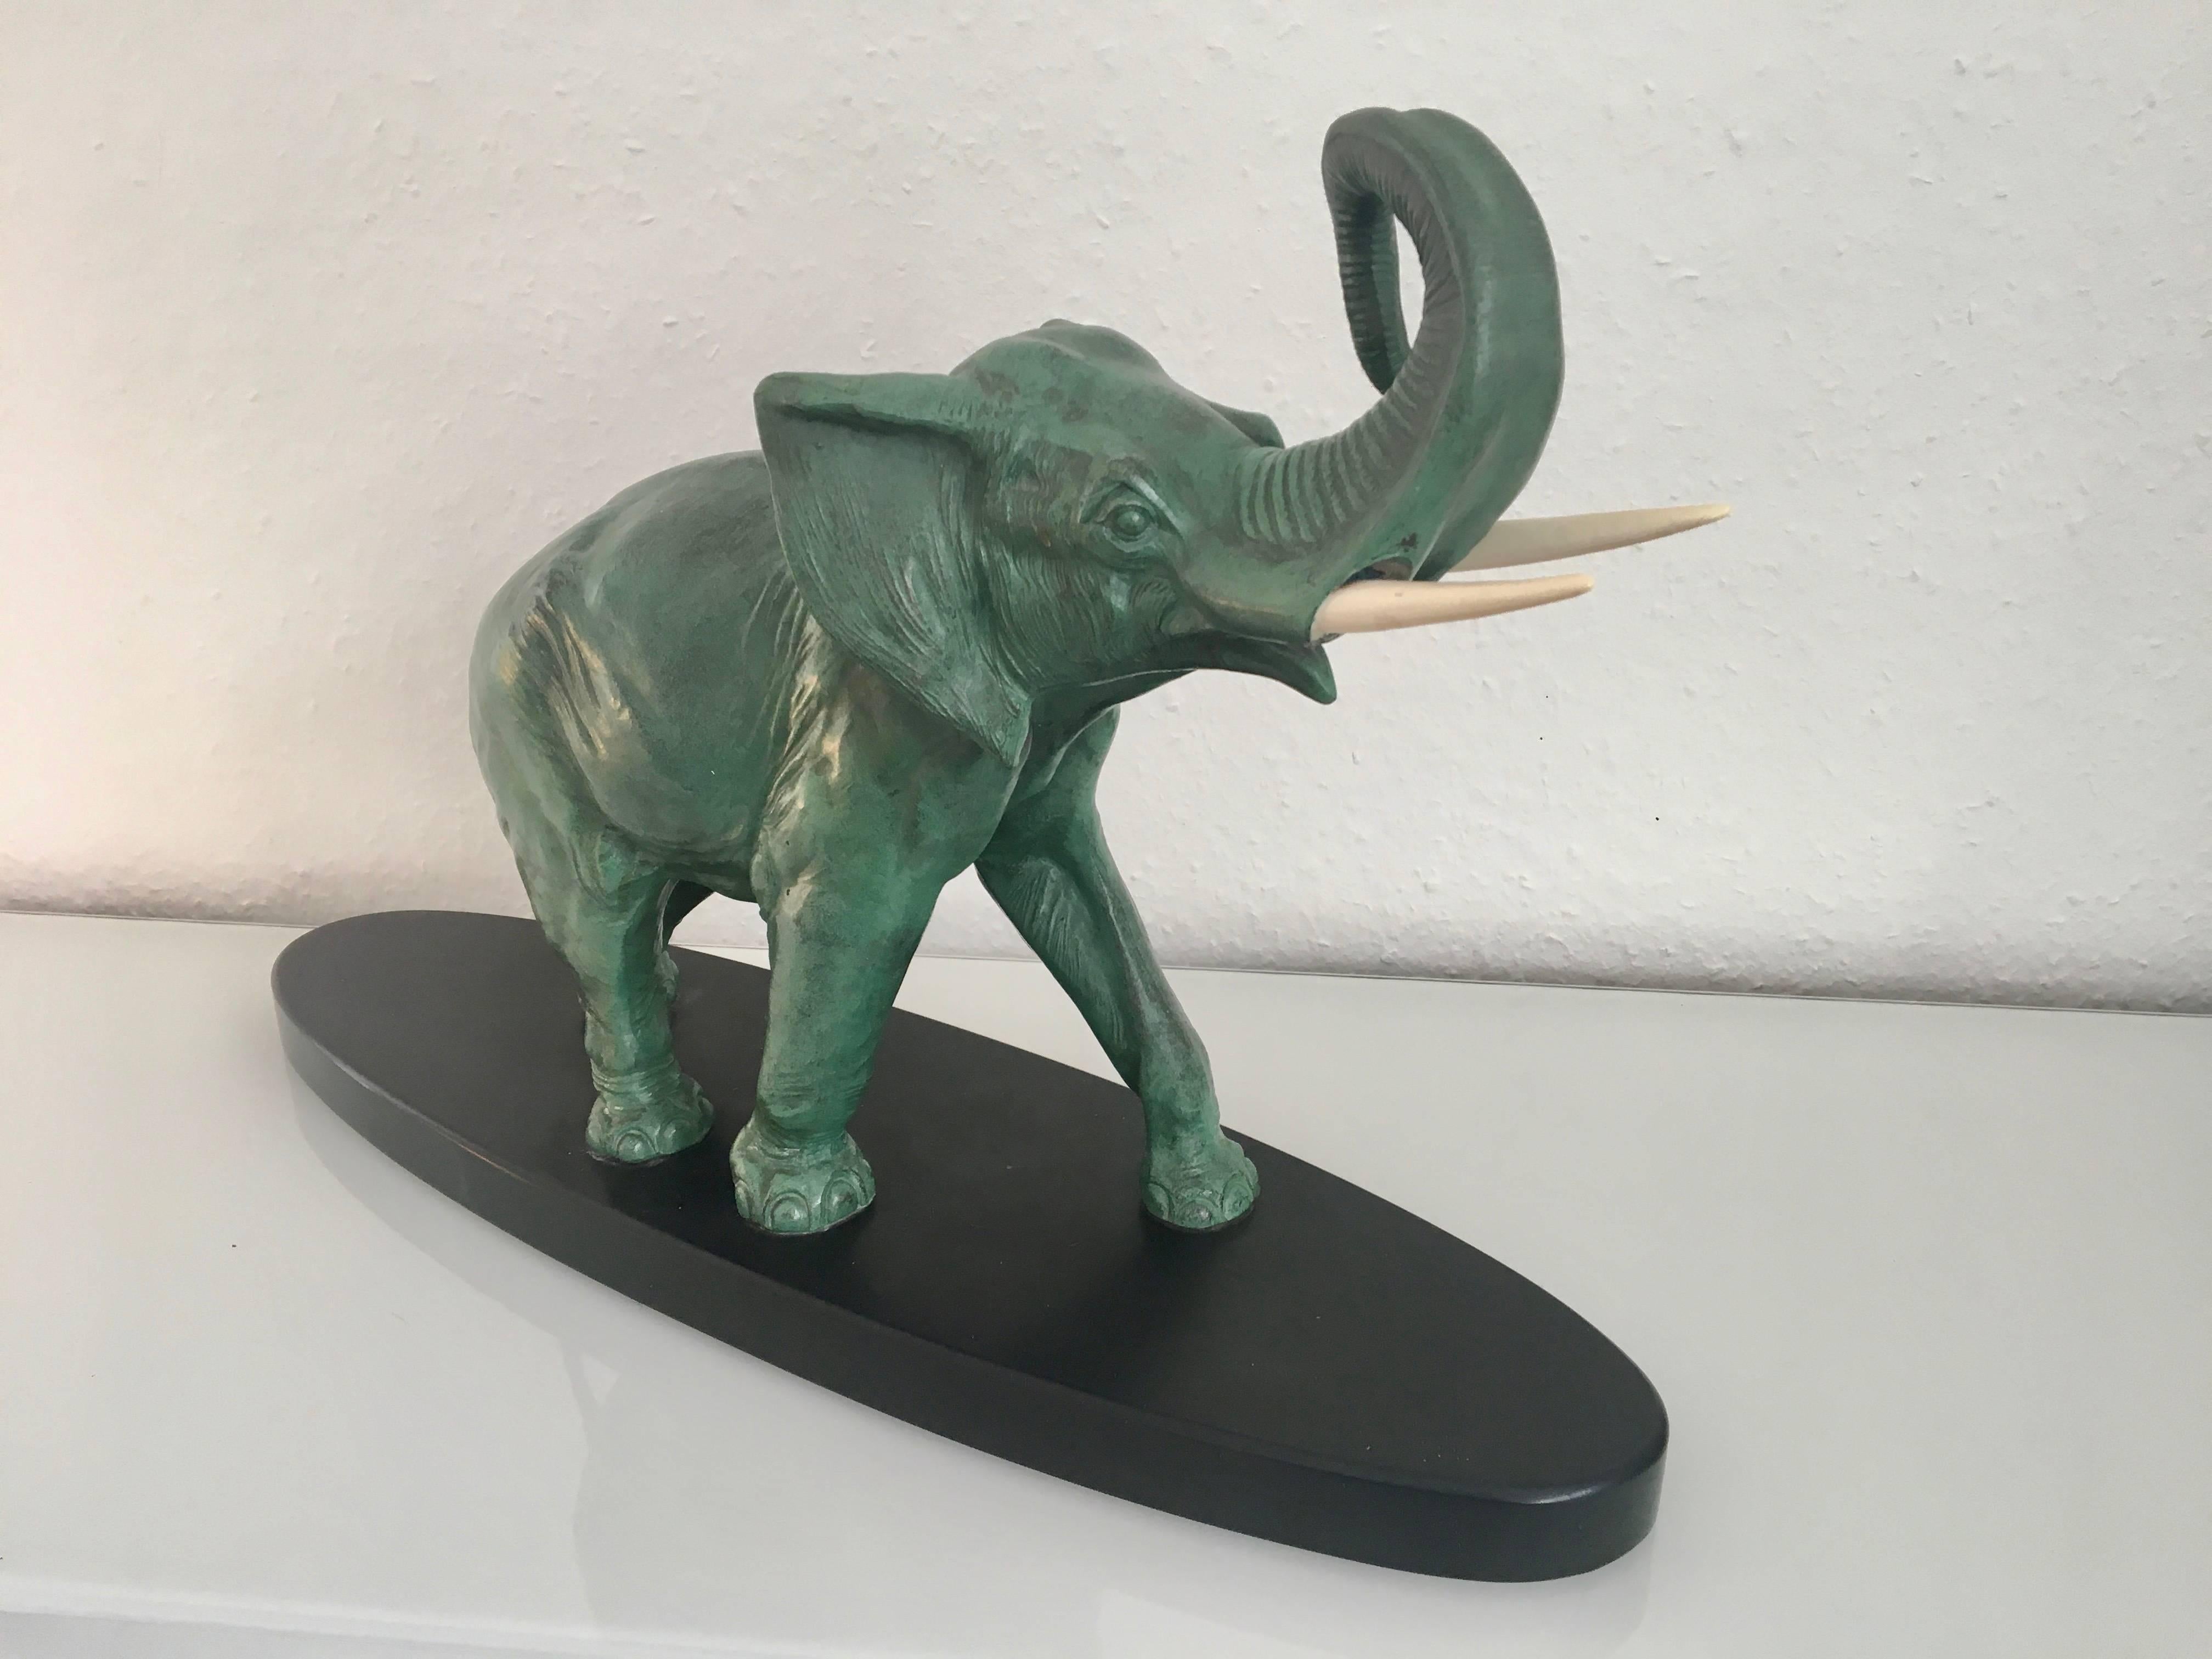 A majestic illustration of an elephant raising high his trunk.
The sculpture is made in the style of 